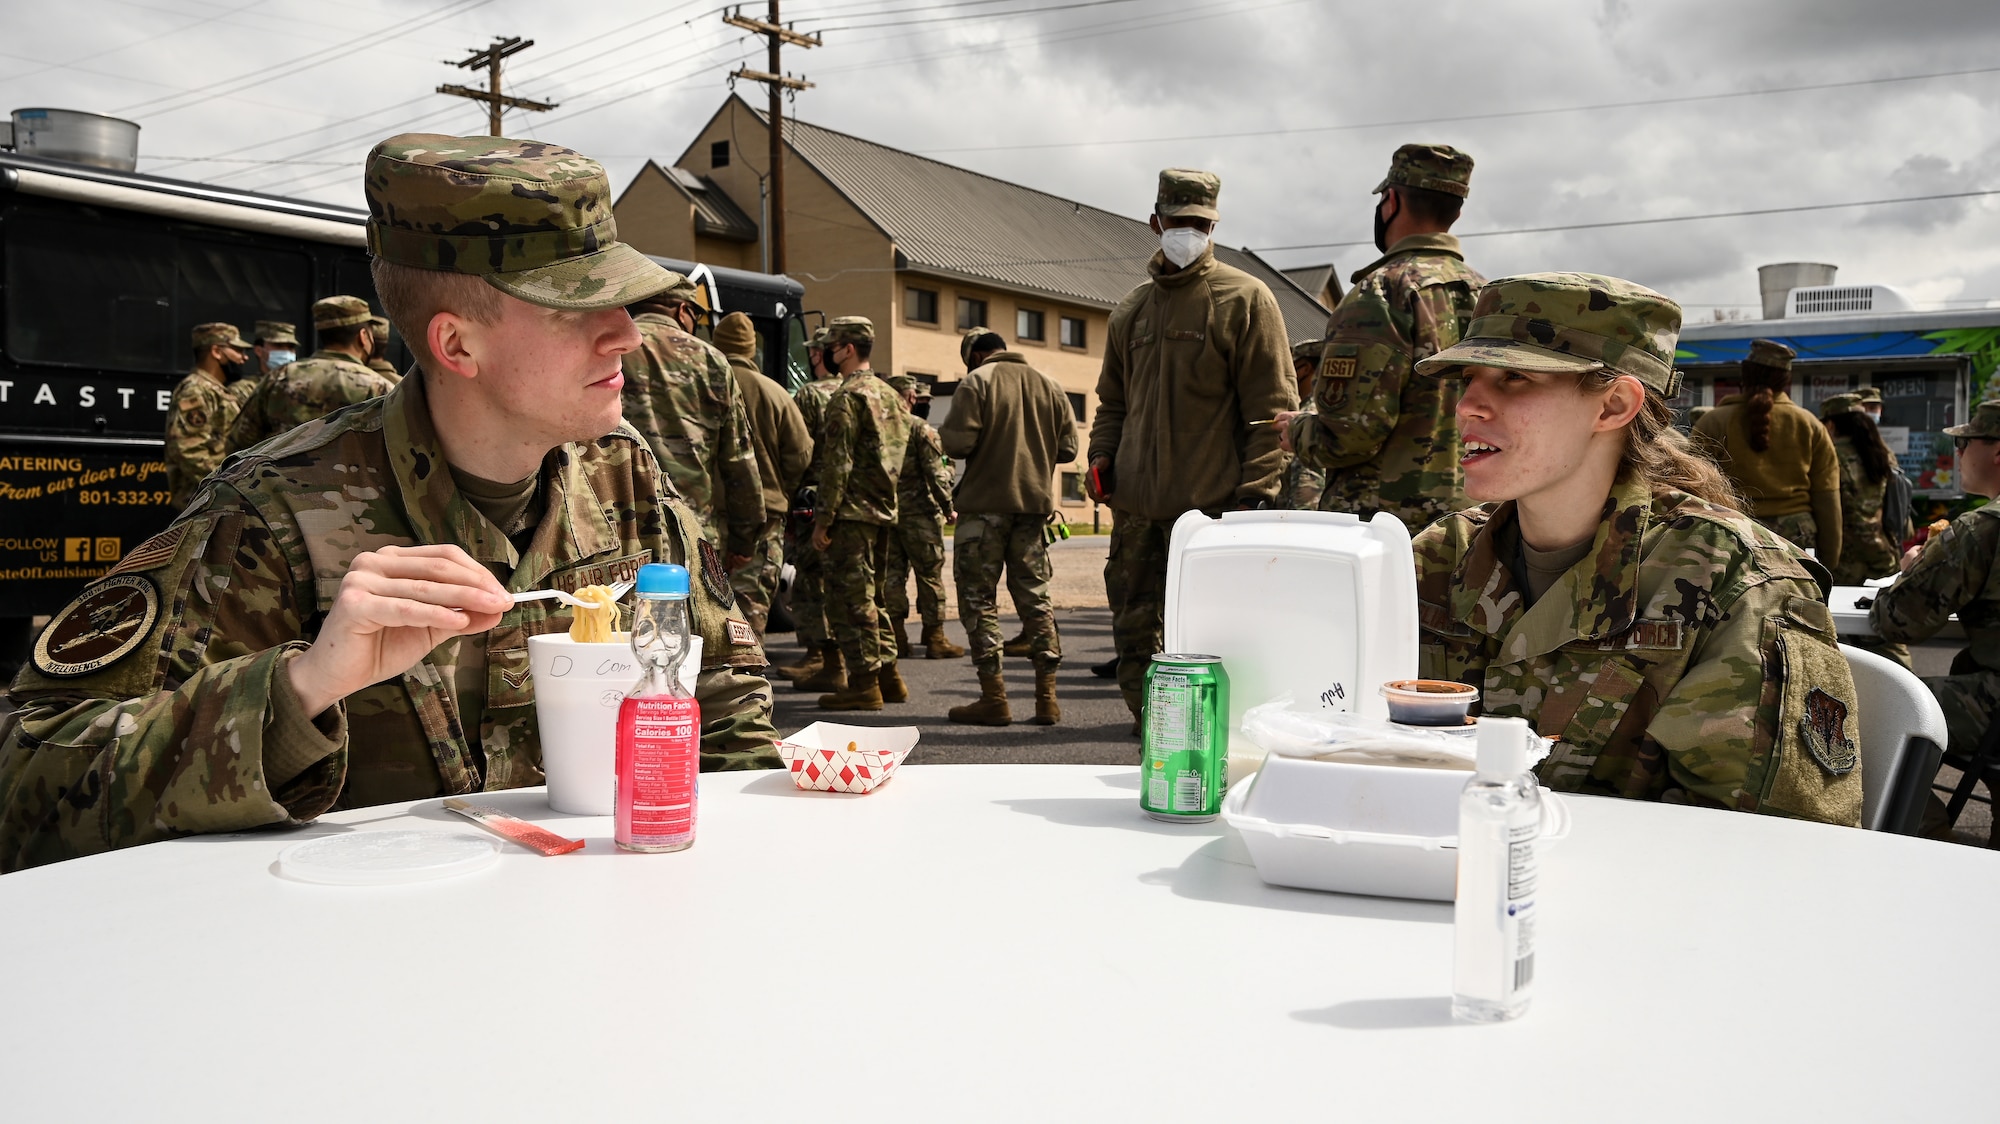 Two Airmen sitting at a table talking and eating.